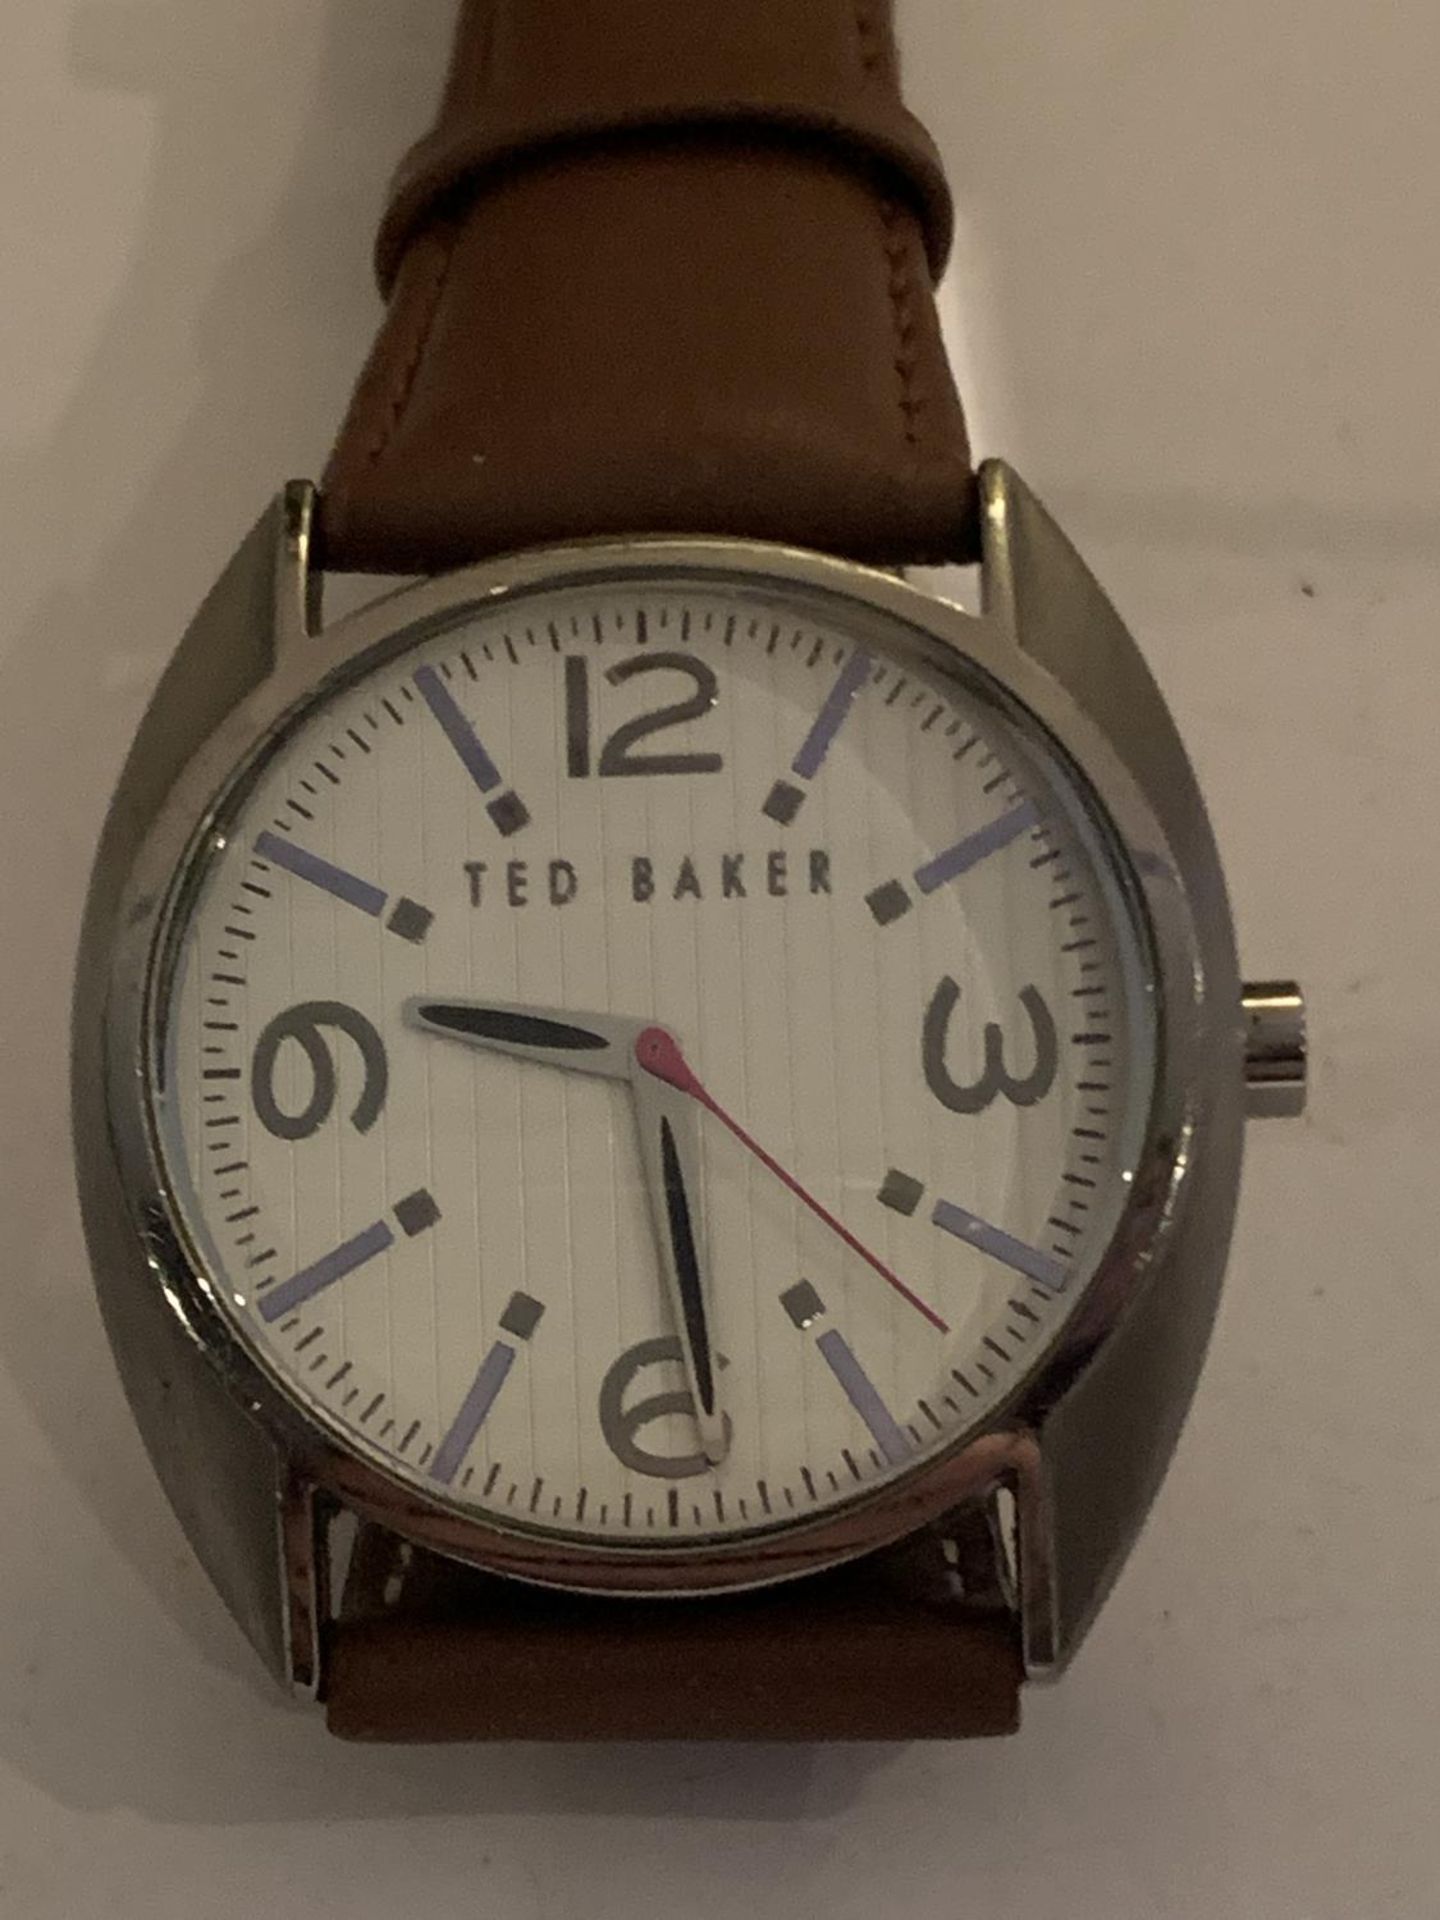 A TED BAKER WRISTWATCH SEEN WORKING BUT NO WARRANTY - Image 2 of 3